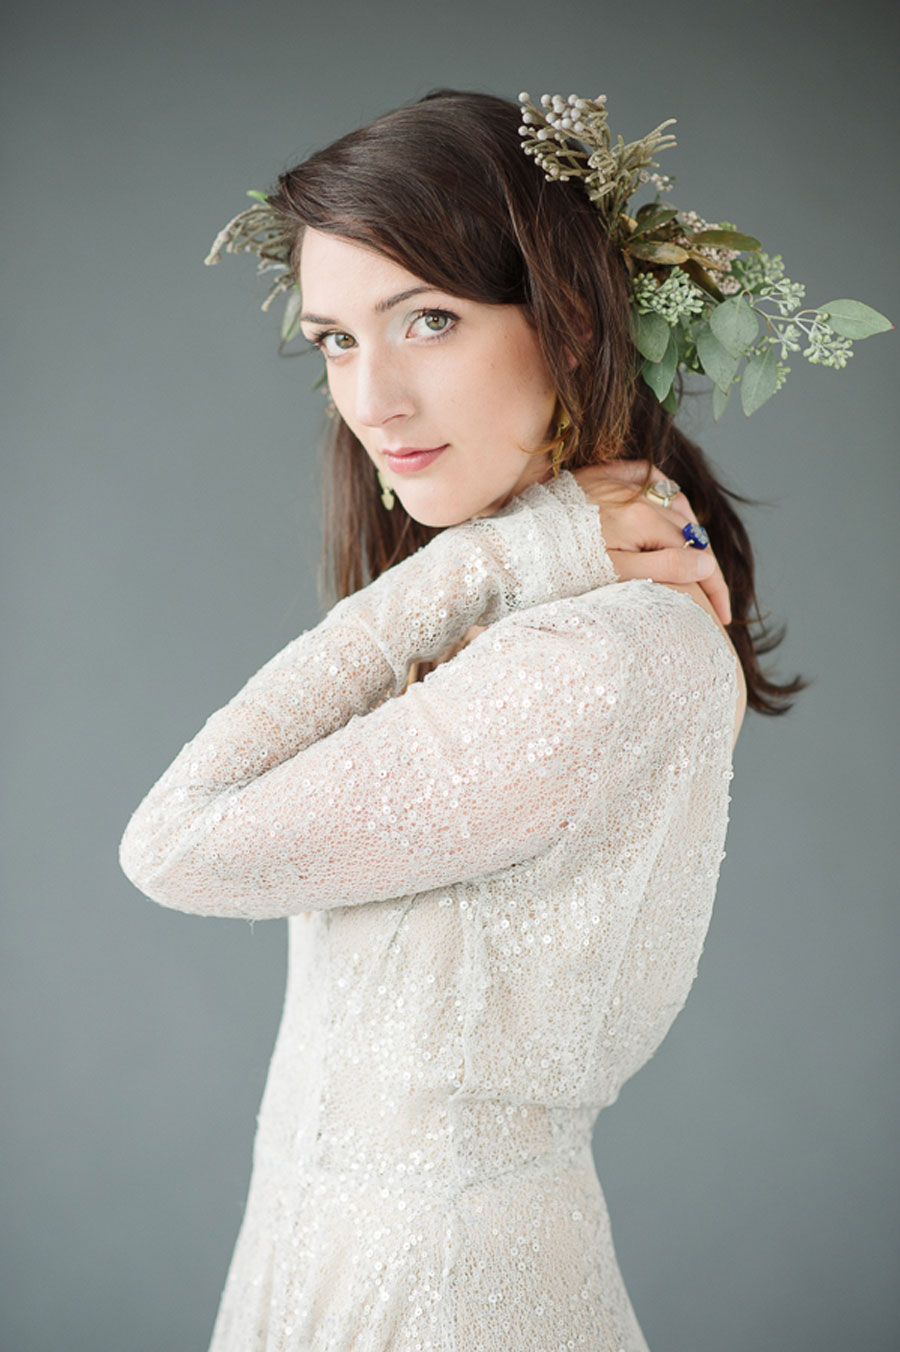 Sea & Stone Styled Bridal Editorial With Touches of Gold & Teal!